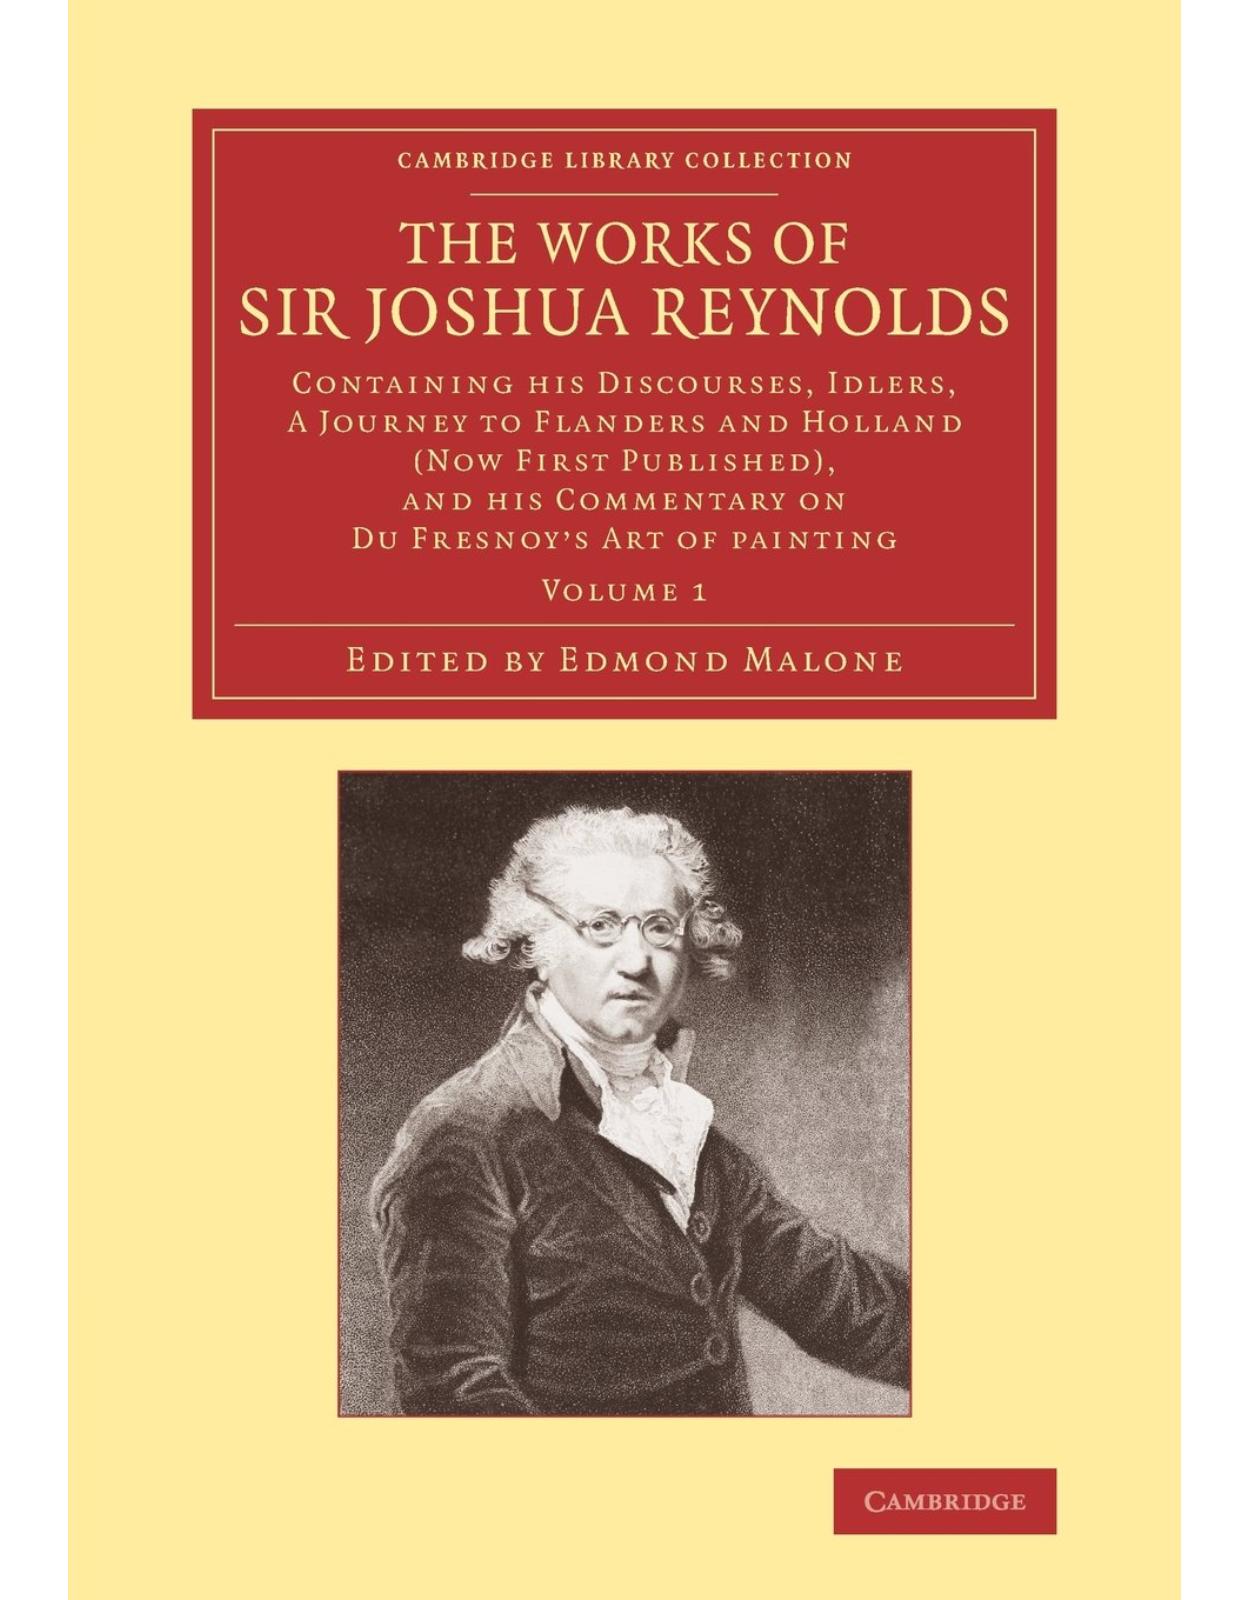 The Works of Sir Joshua Reynolds 2 Volume Set: Containing his  Discourses, Idlers, A Journey to Flanders  and Holland (Now First Published), and his Commentary on Du Fresnoy's 'Art of Painting'